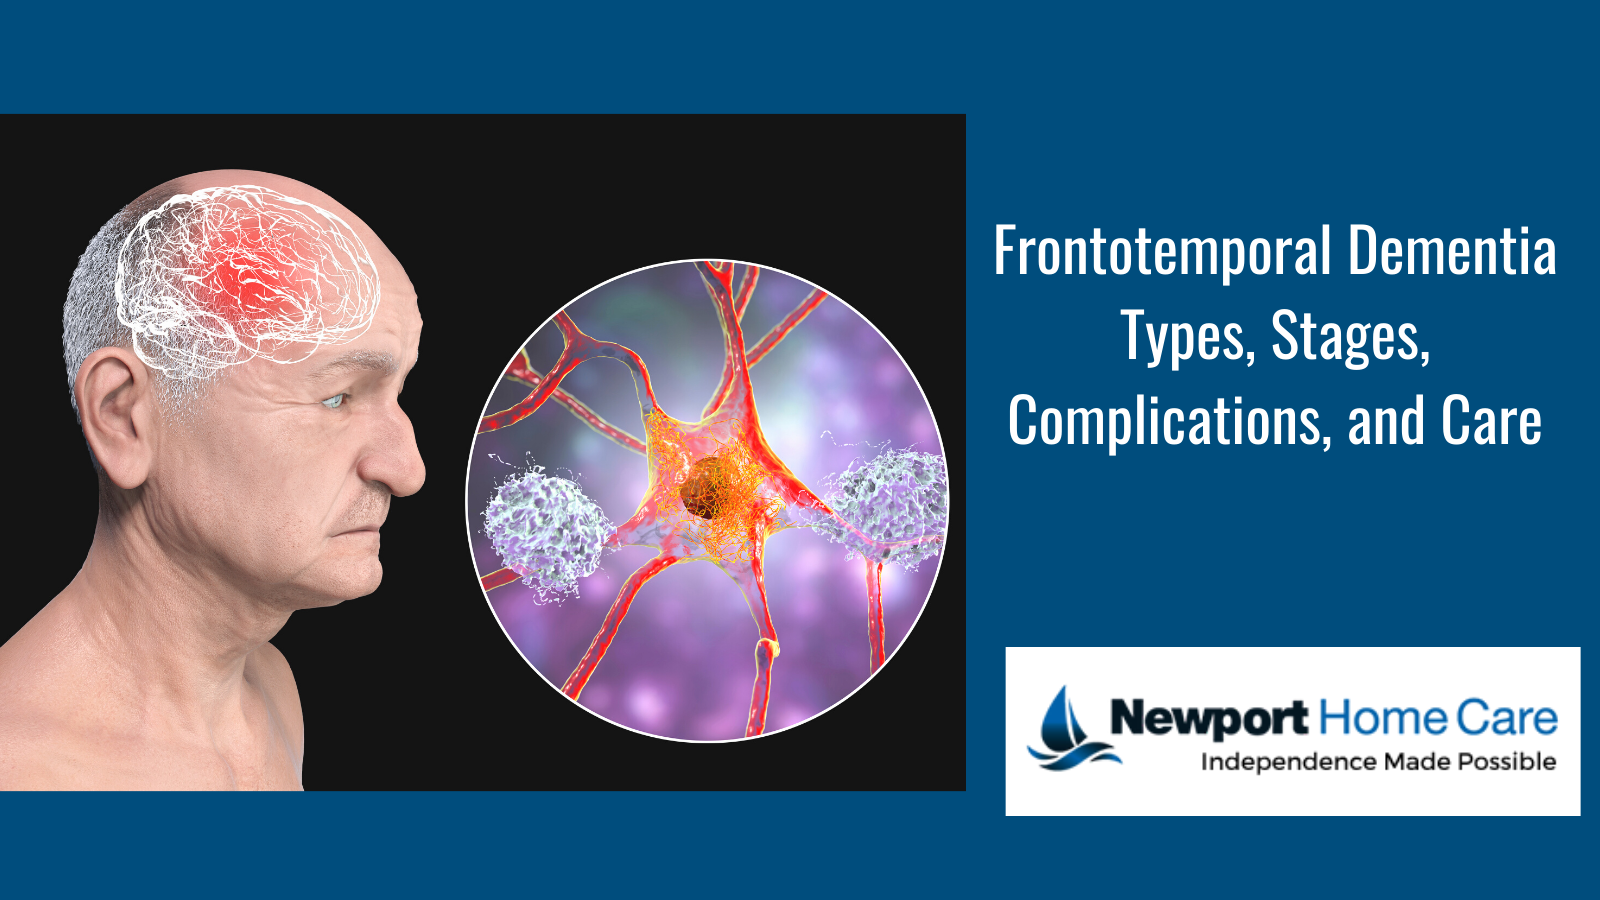 Frontotemporal Dementia: Types, Stages, Complications, and Care